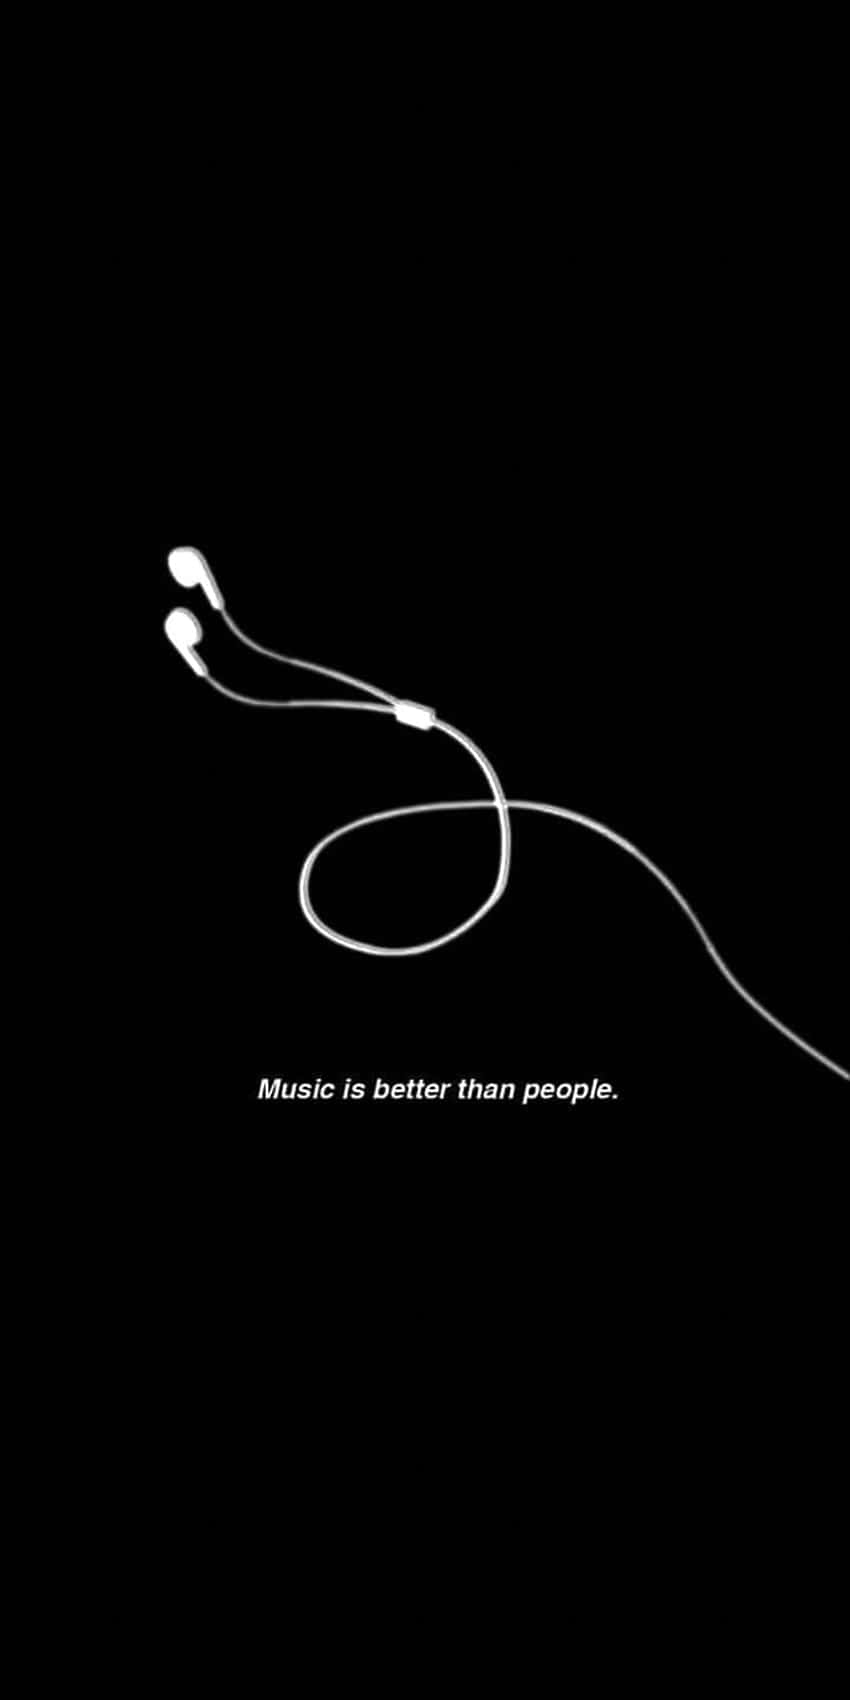 Music Over People Quote Wallpaper